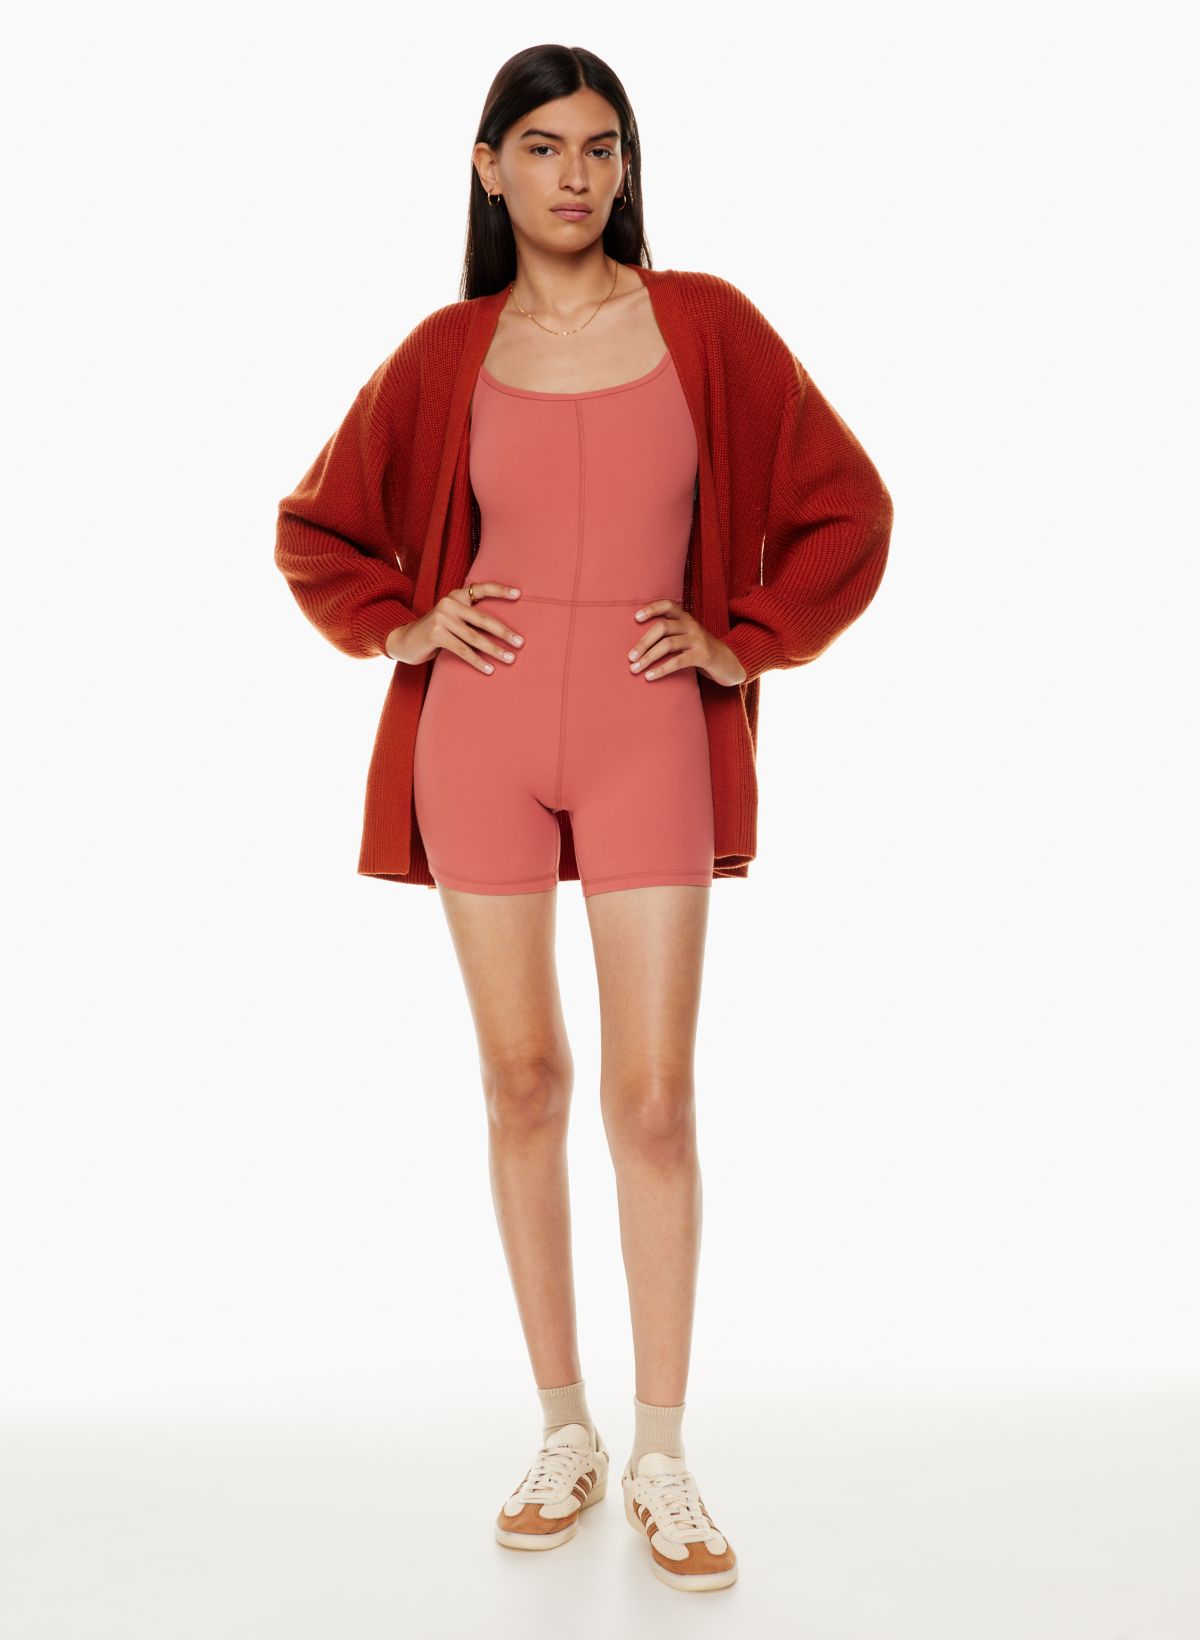 DIVINITY 5 ROMPER  Rompers, Clothes, Flare top